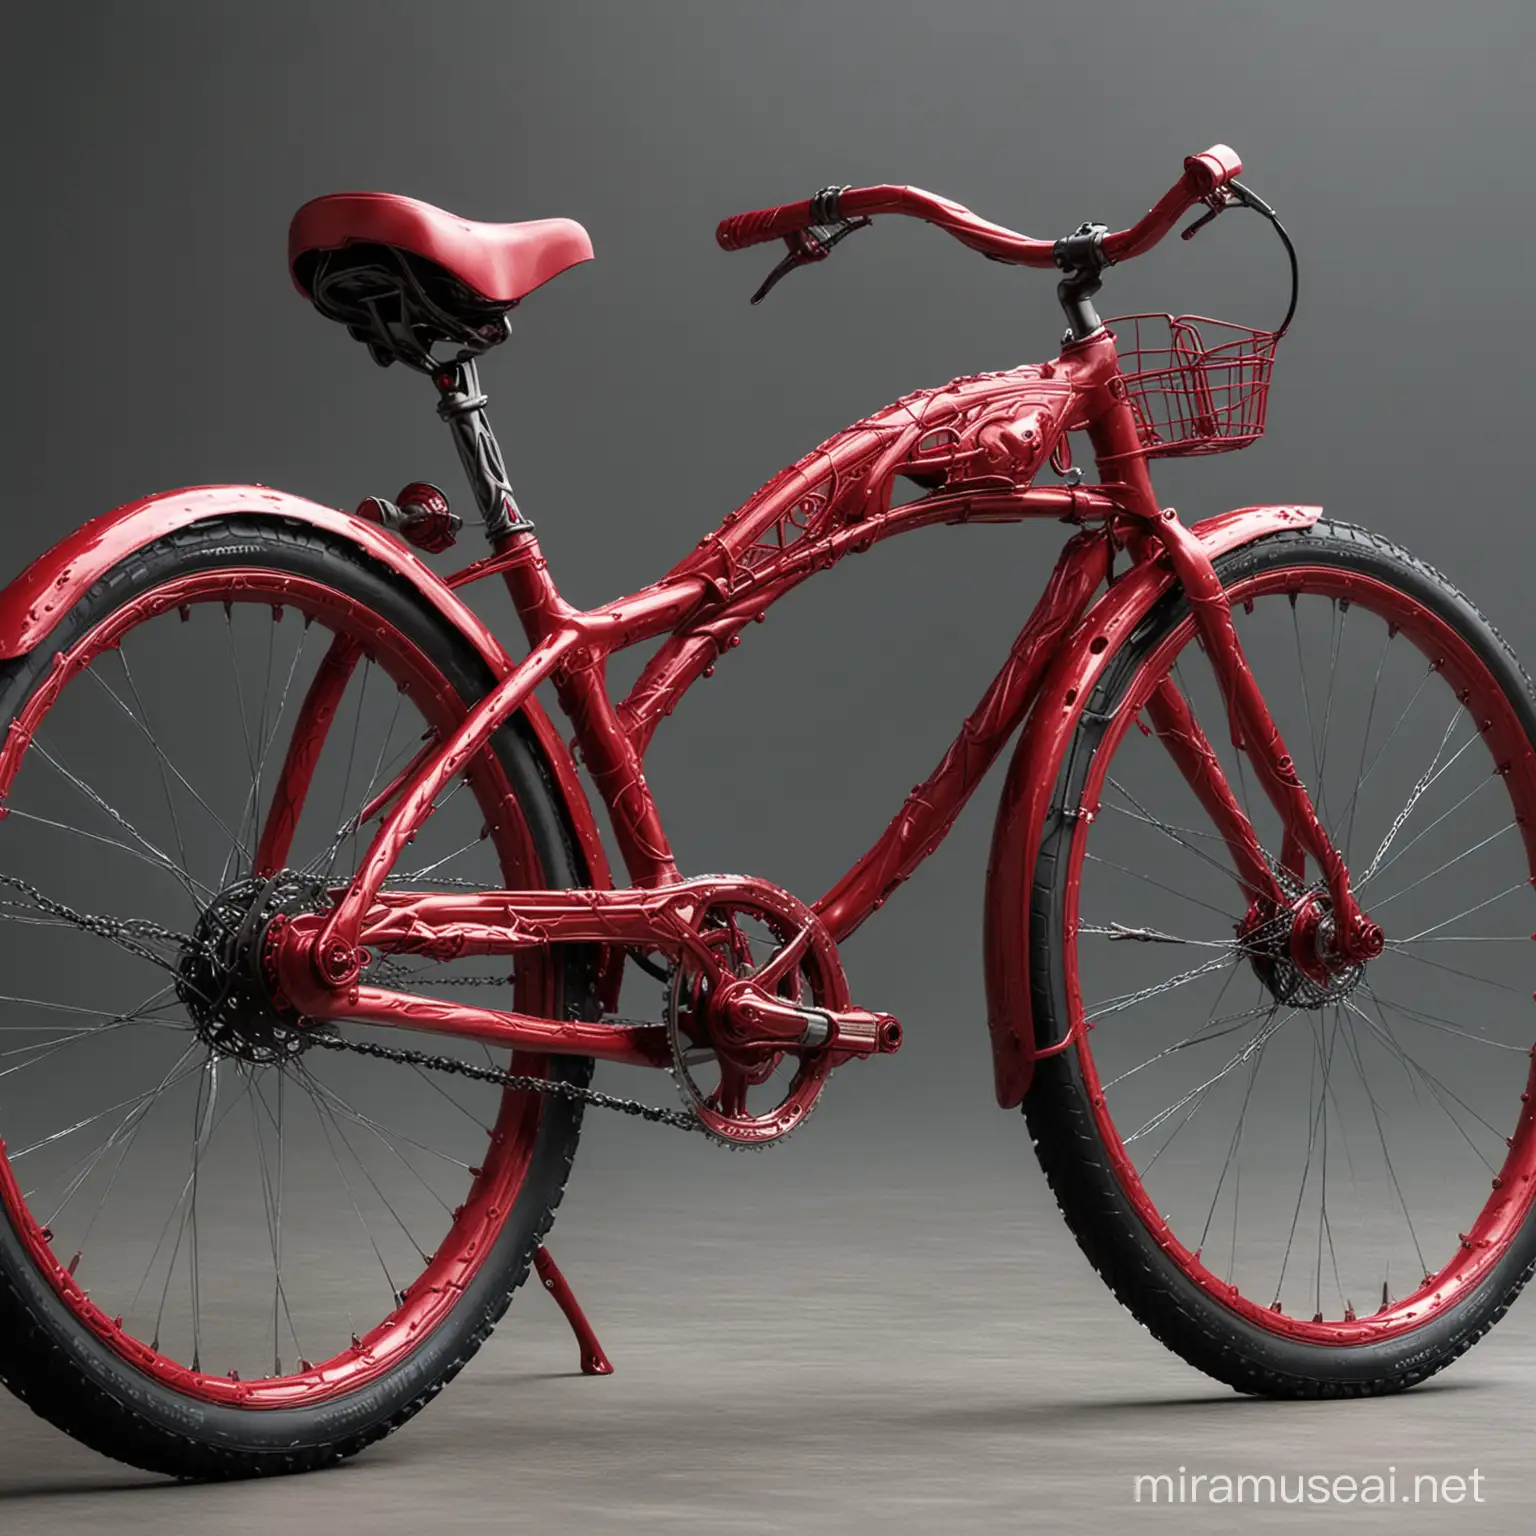 Scarlett witch Style bicycle